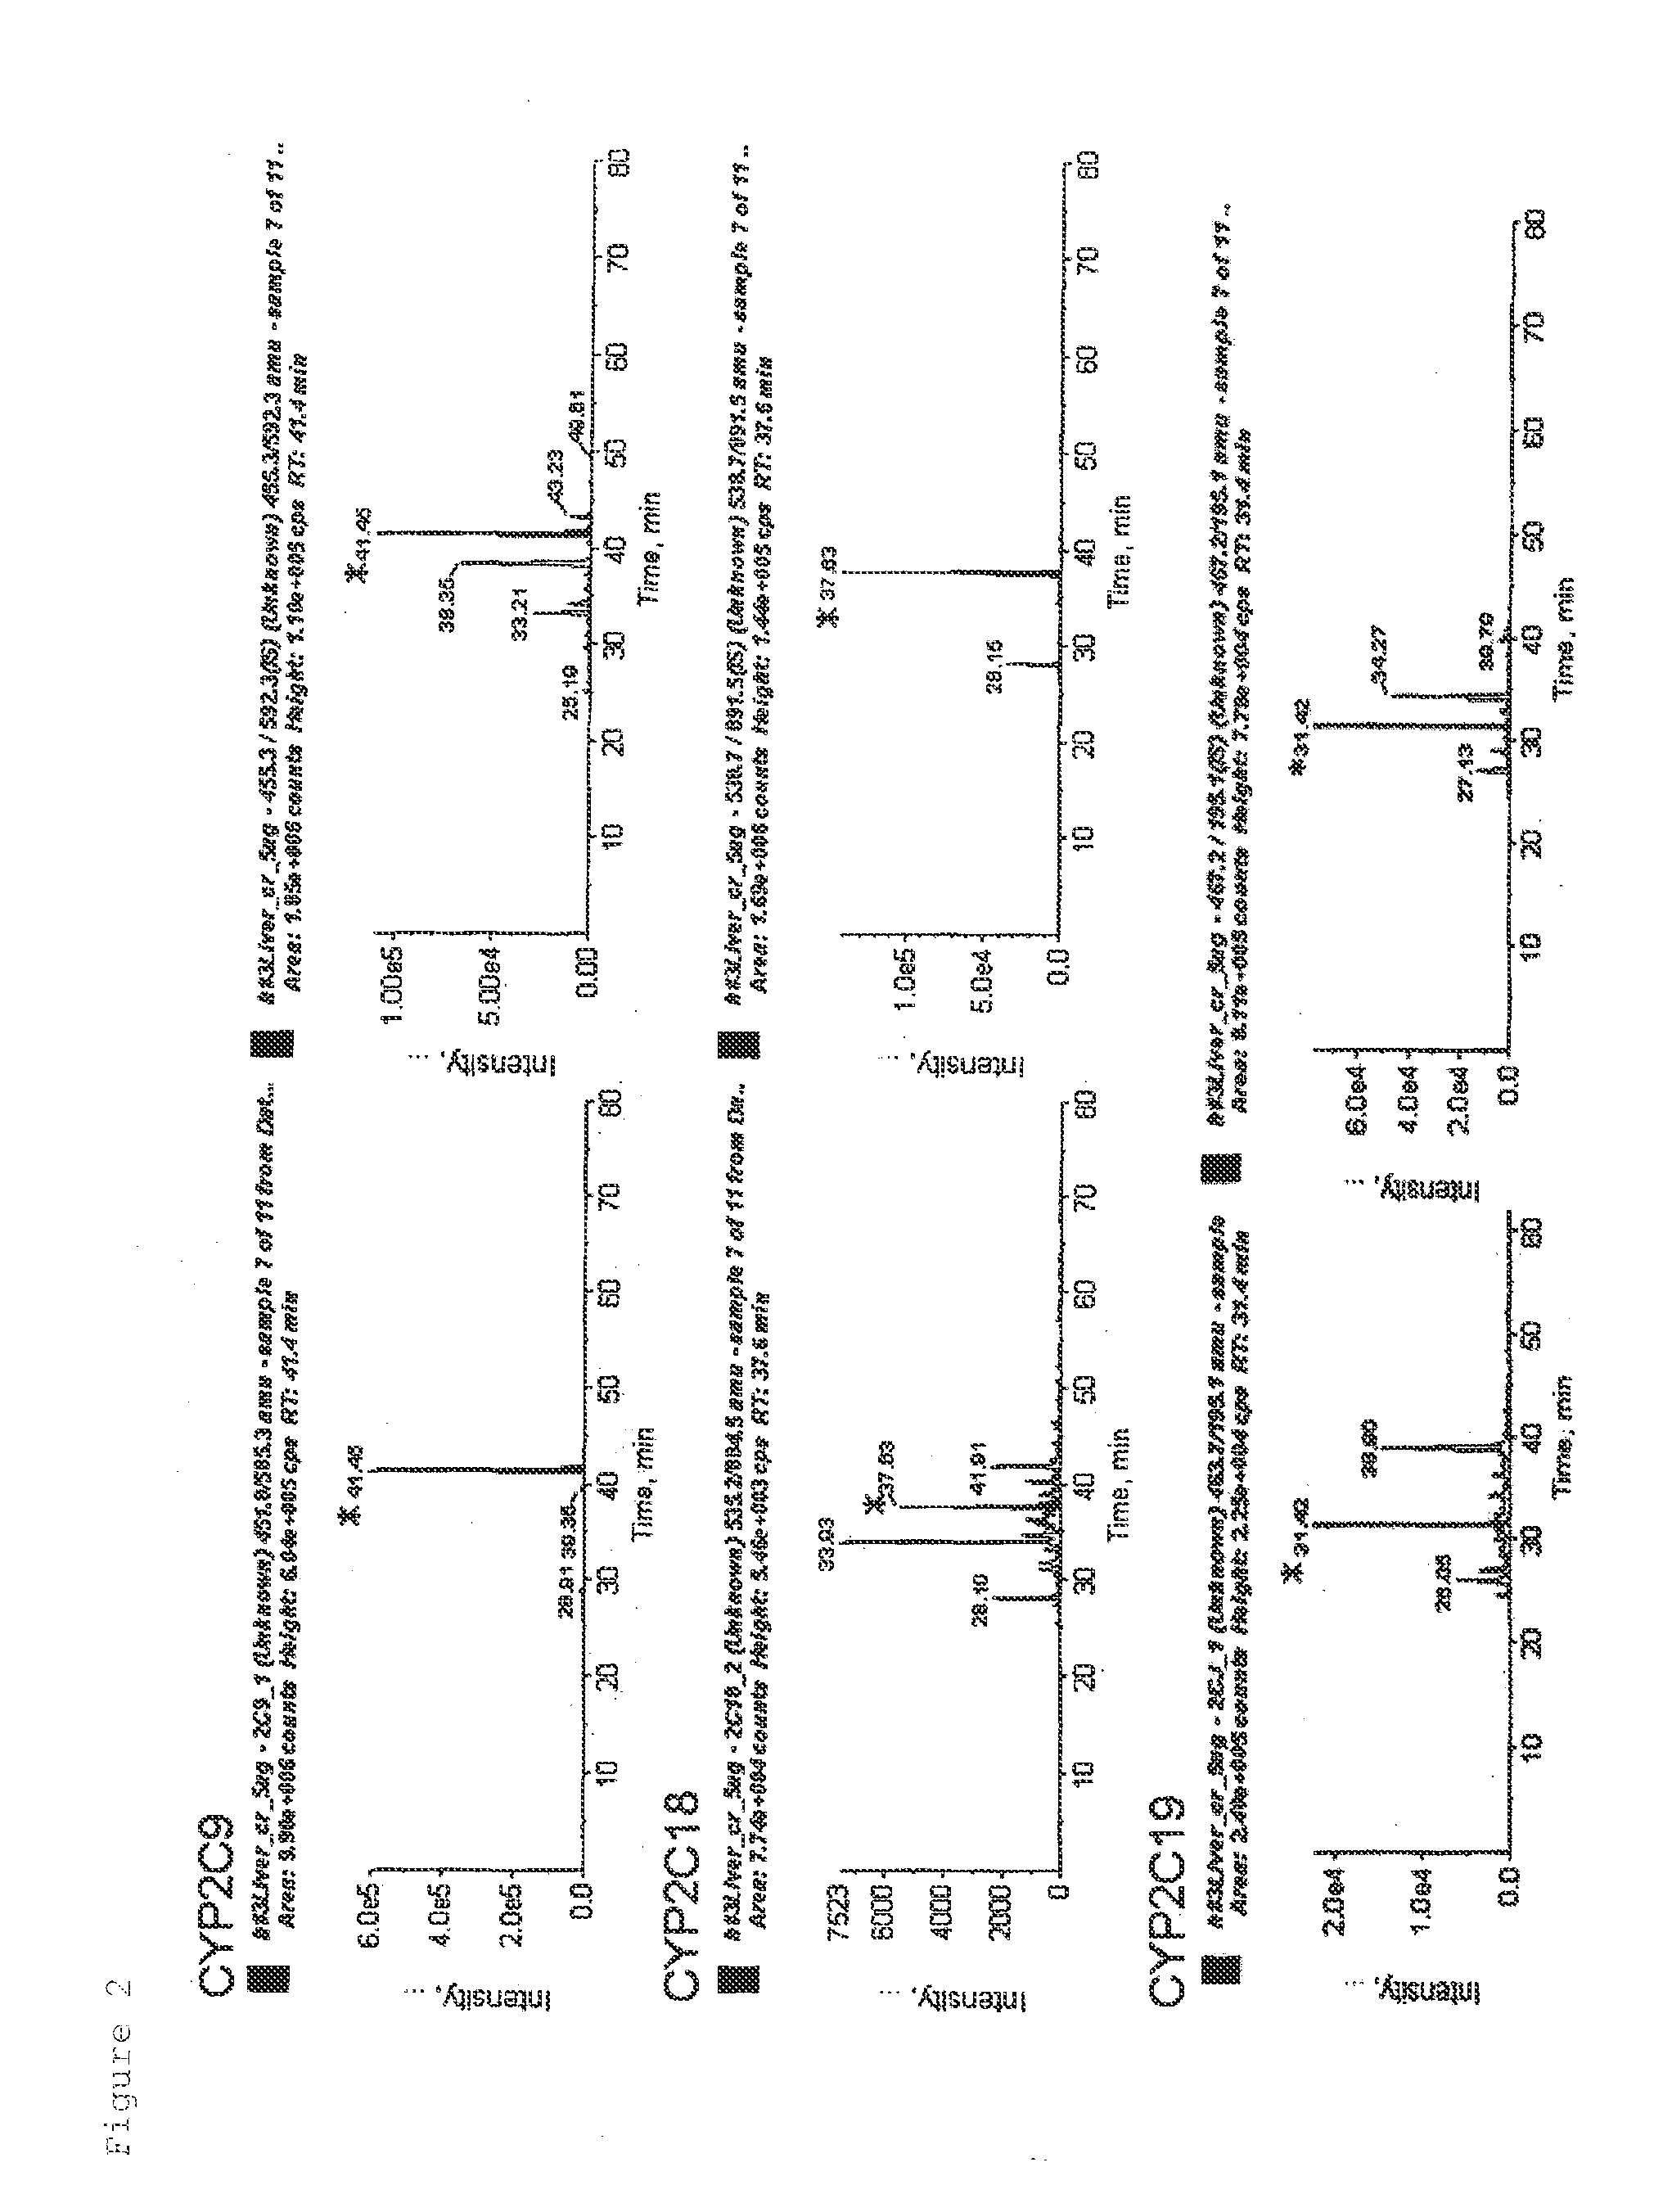 Peptide for use in simultaneous protein quantification of metabolizing enzymes using mass spectrometric analysis apparatus